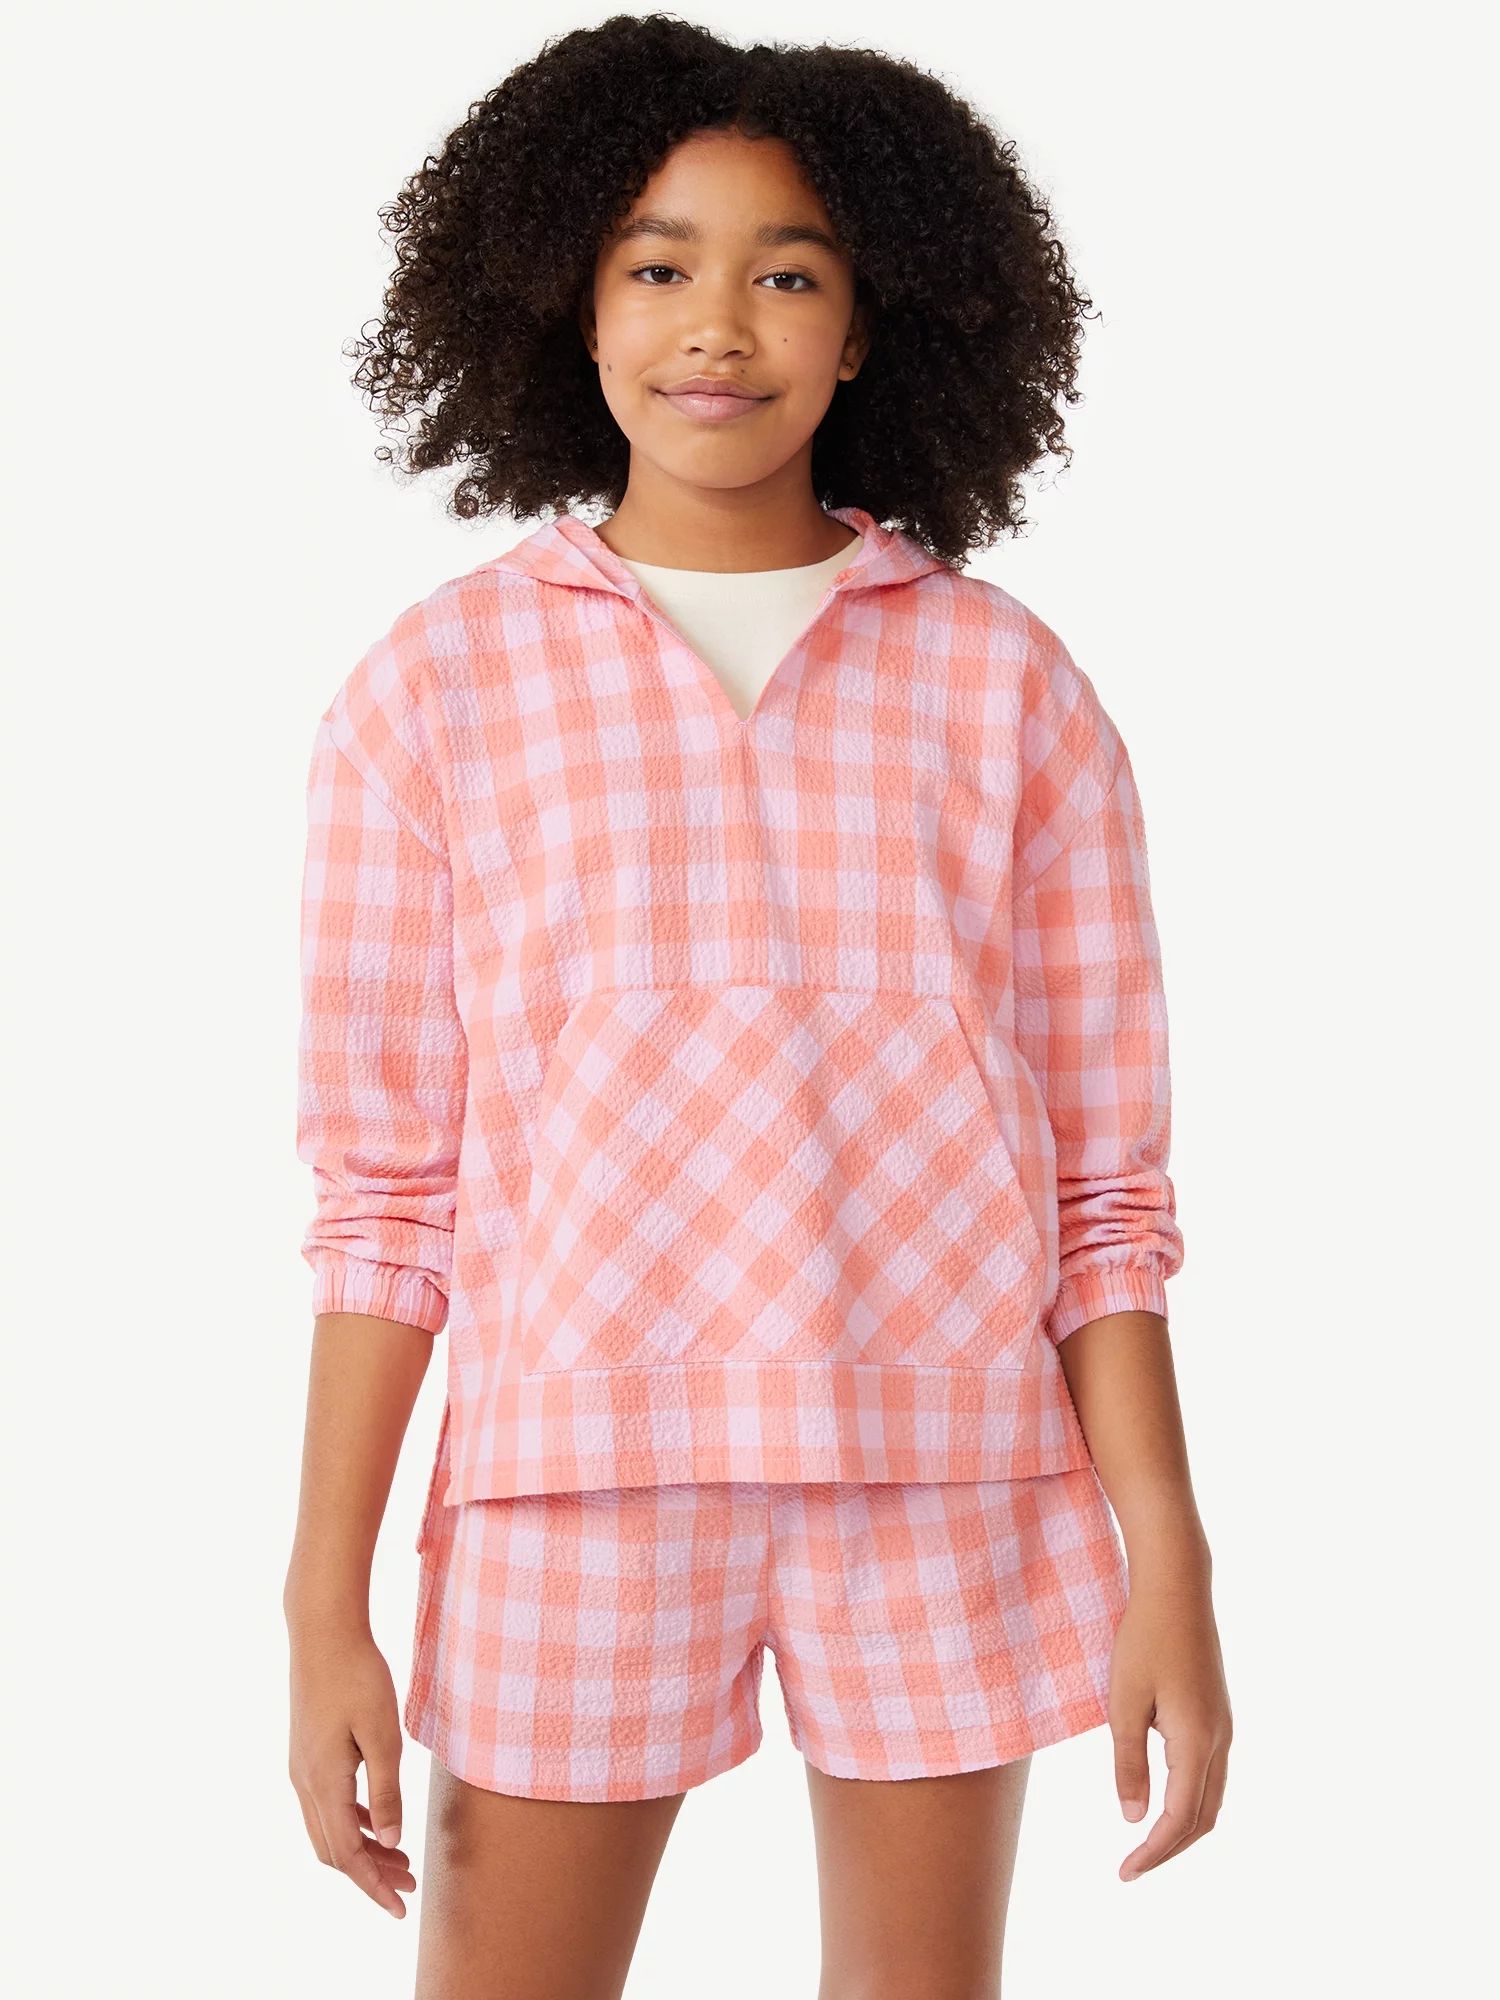 Free Assembly Girls Popover Windbreaker and Shorts, 2-Piece Set, Sizes 4-18 | Walmart (US)